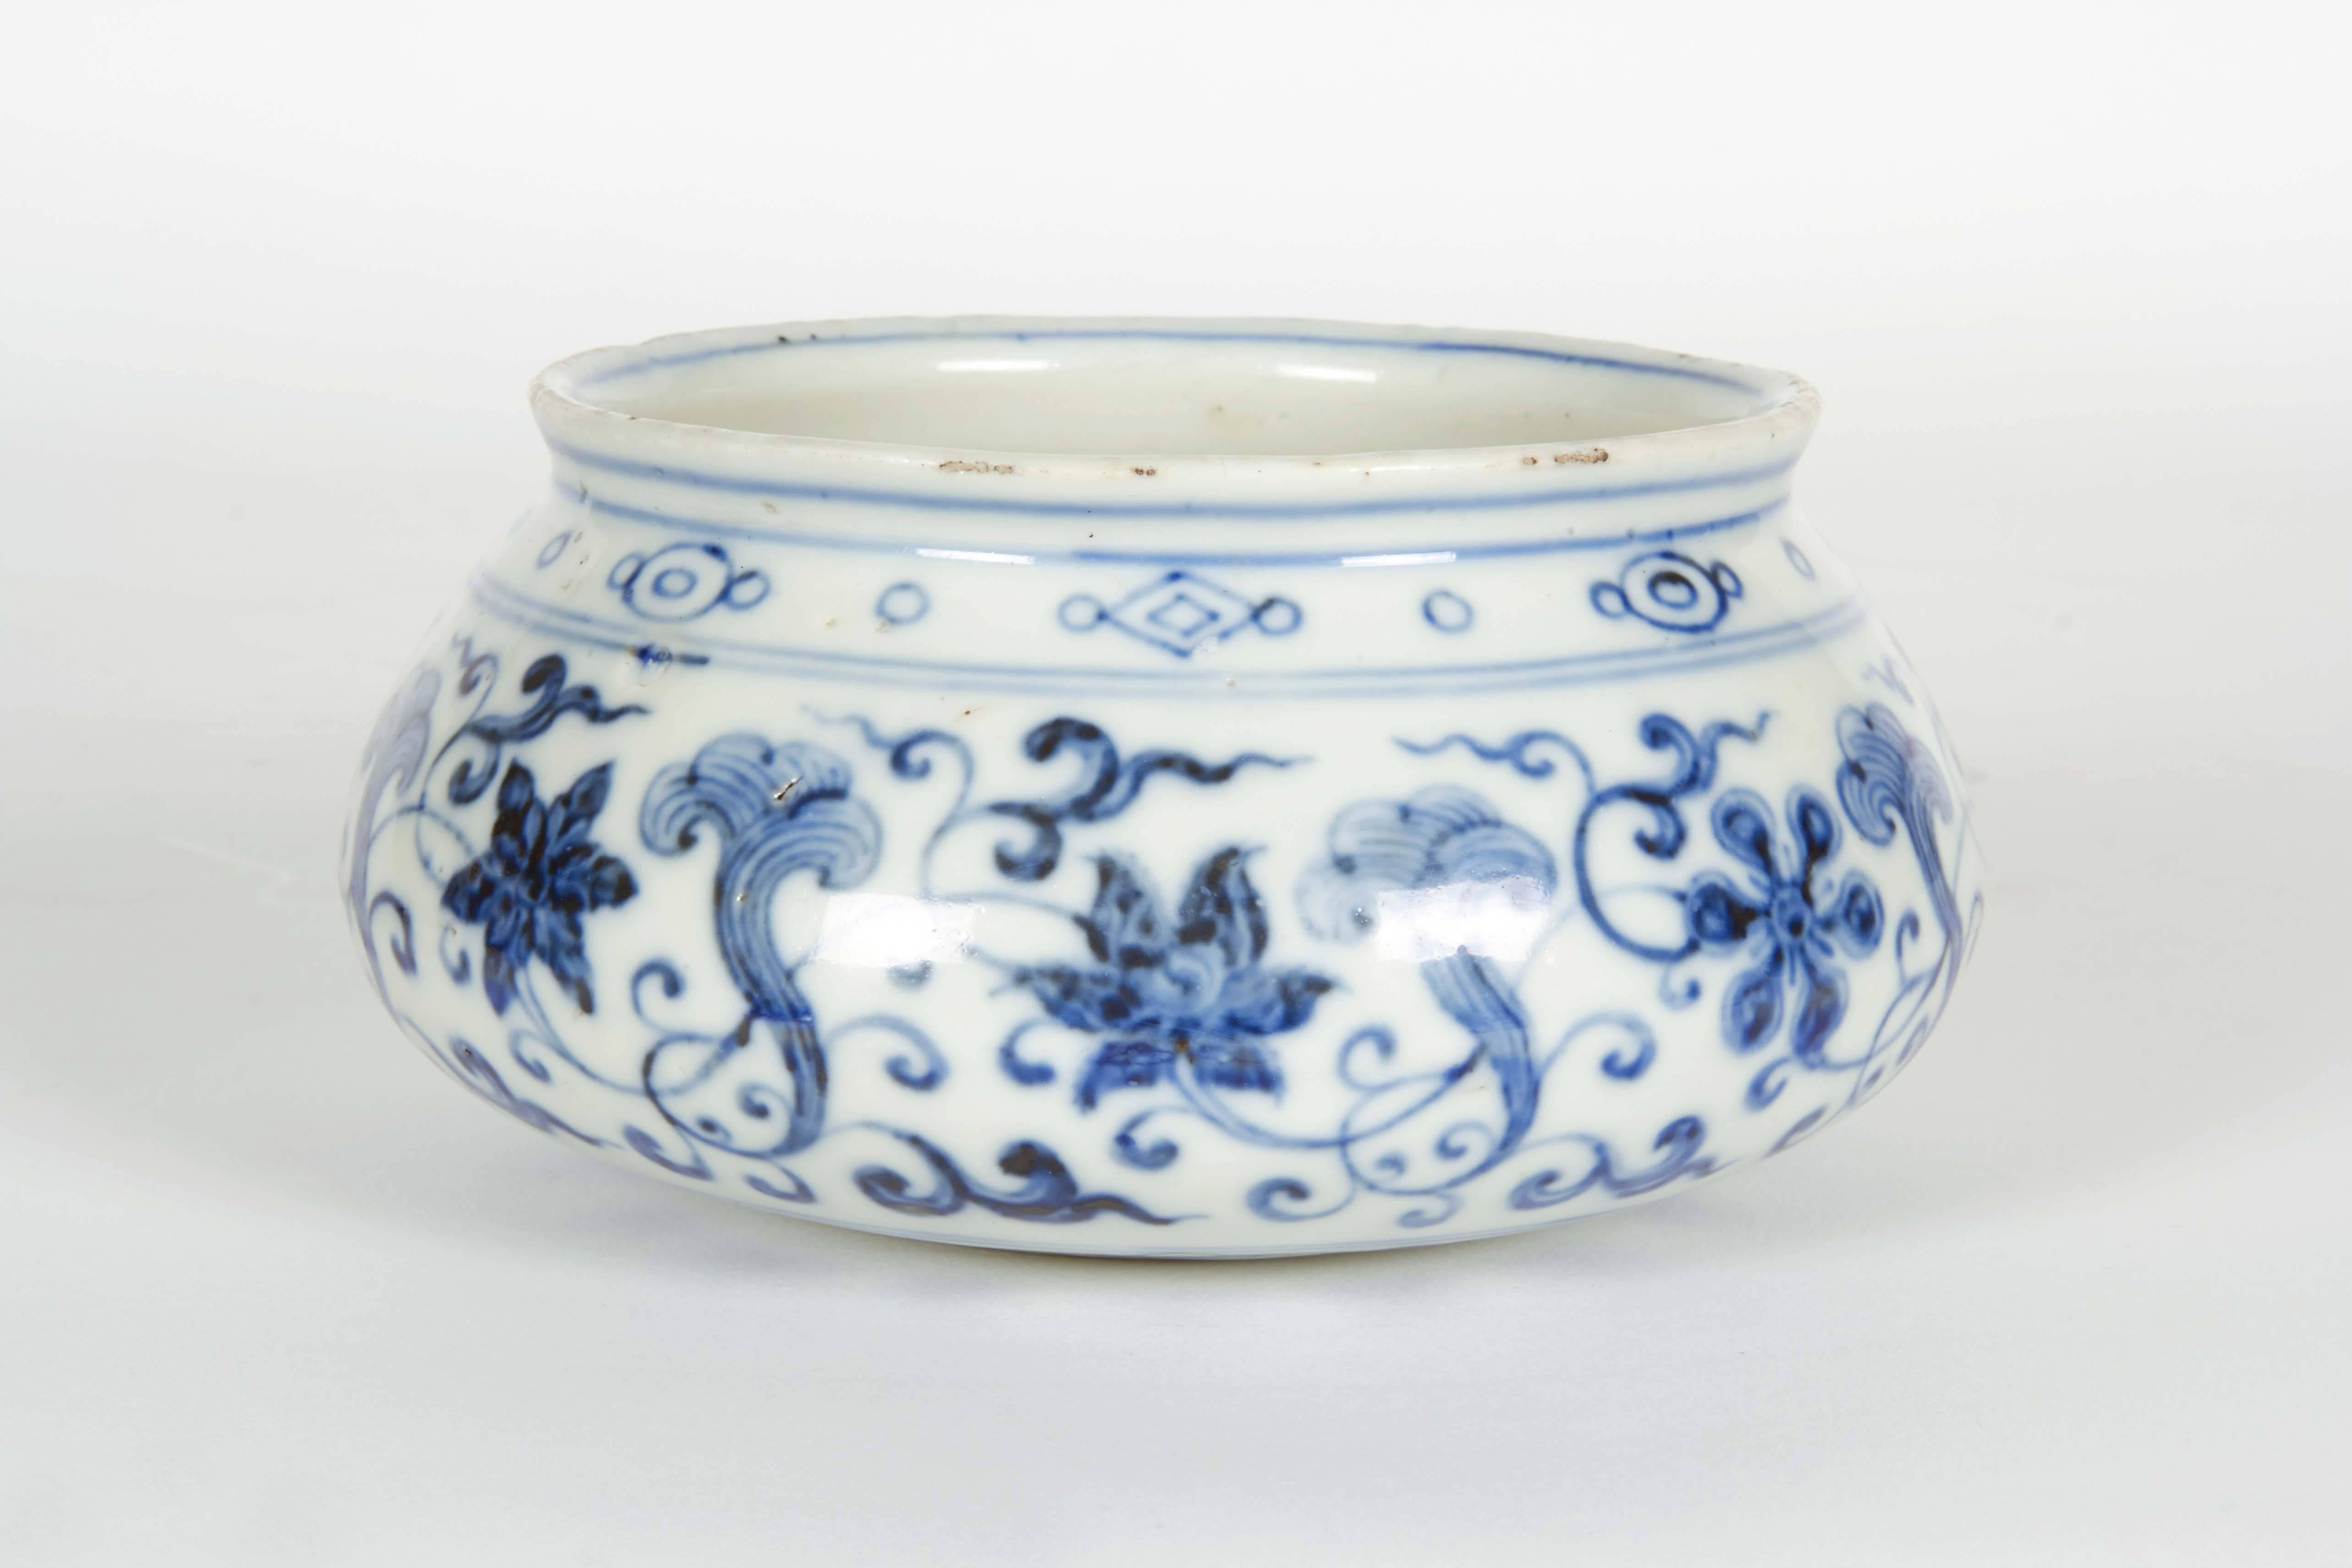 A very fine Chinese porcelain blue and white bowl. Ming dynasty.